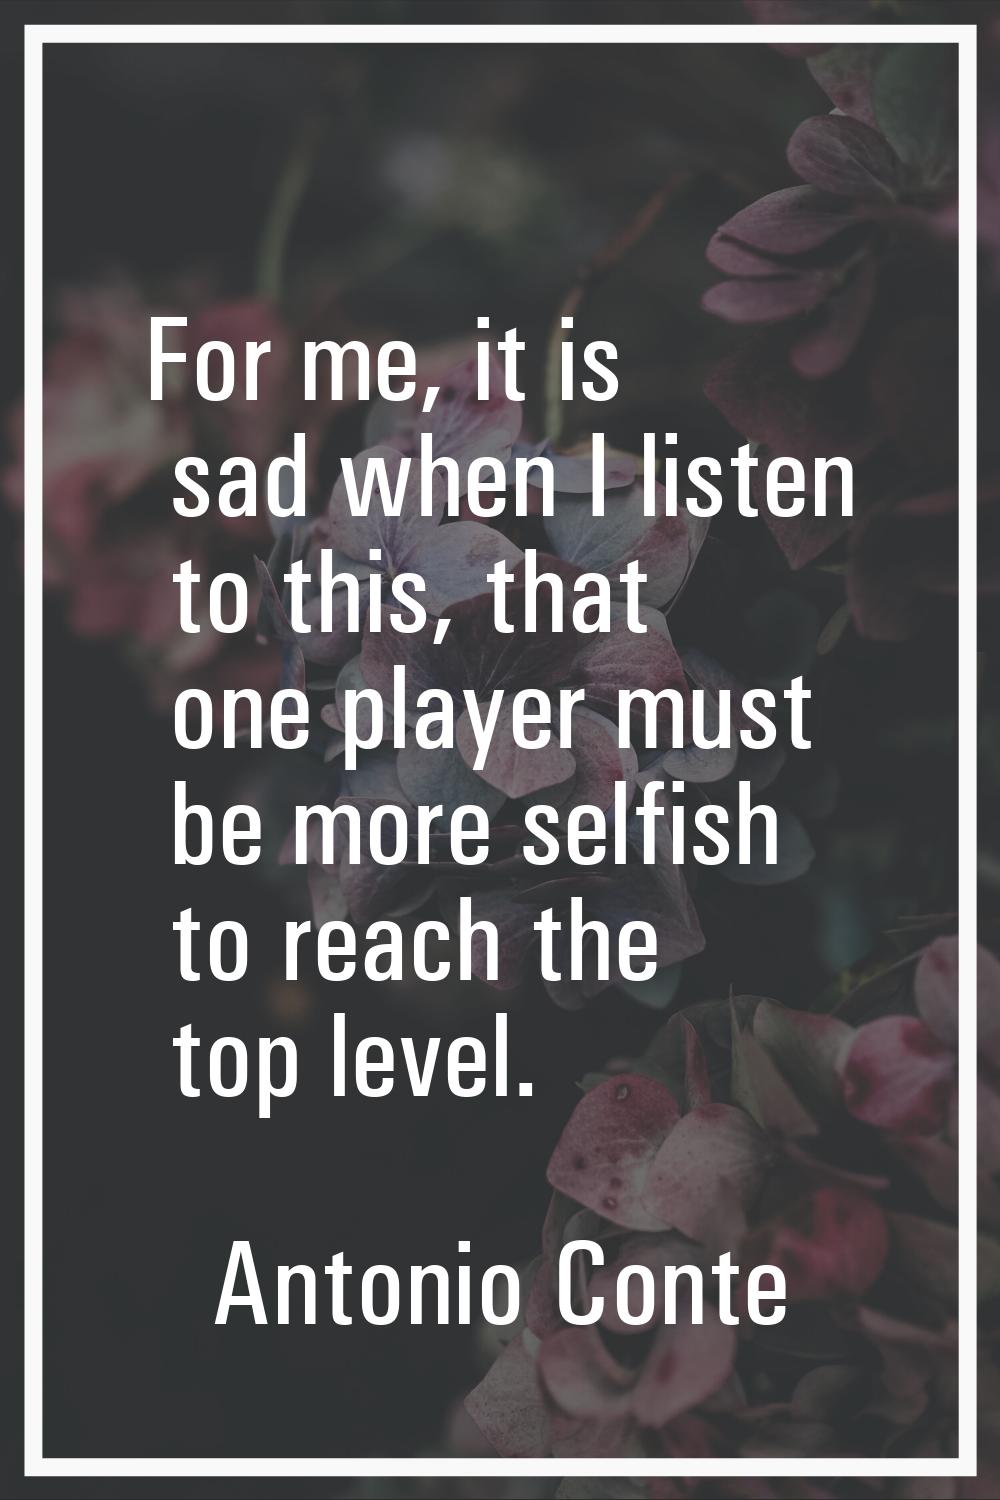 For me, it is sad when I listen to this, that one player must be more selfish to reach the top leve